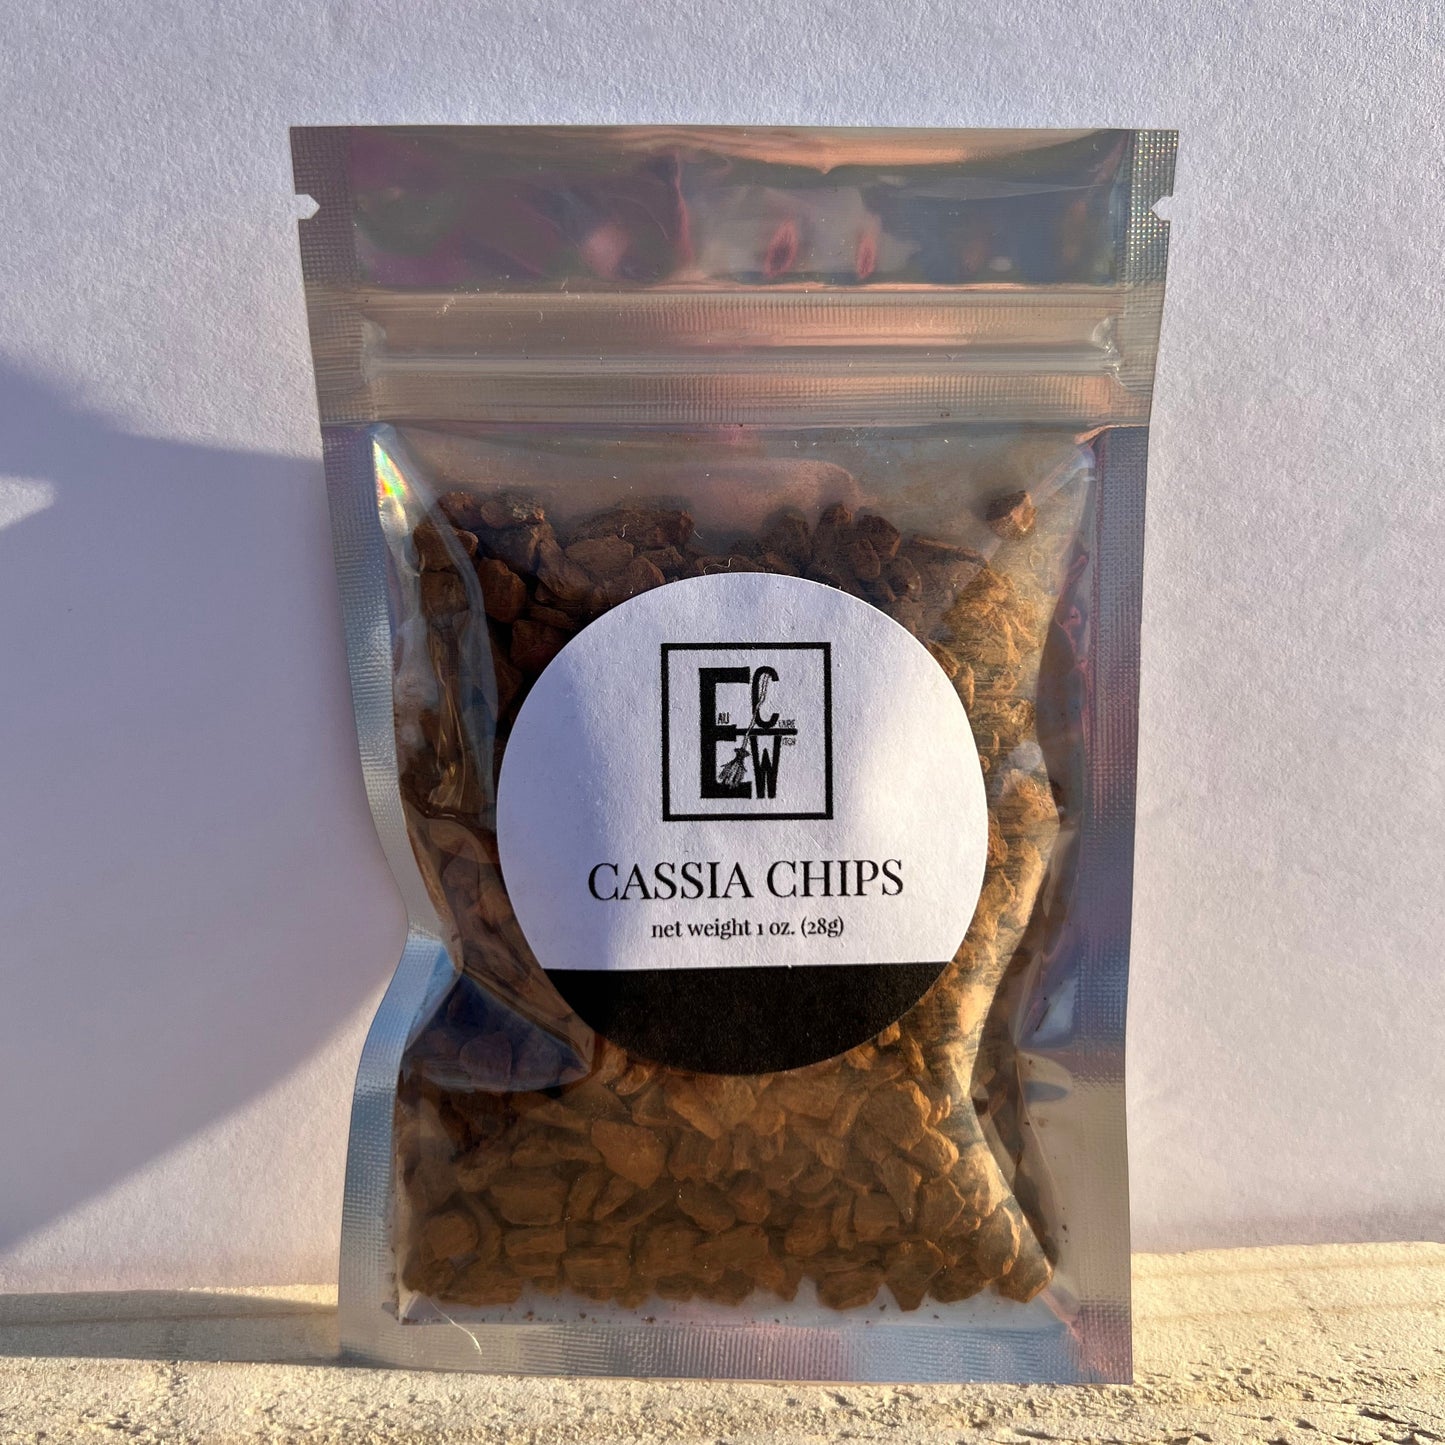 1 oz. bag of cassia chips, in a holographic bag, with a label.